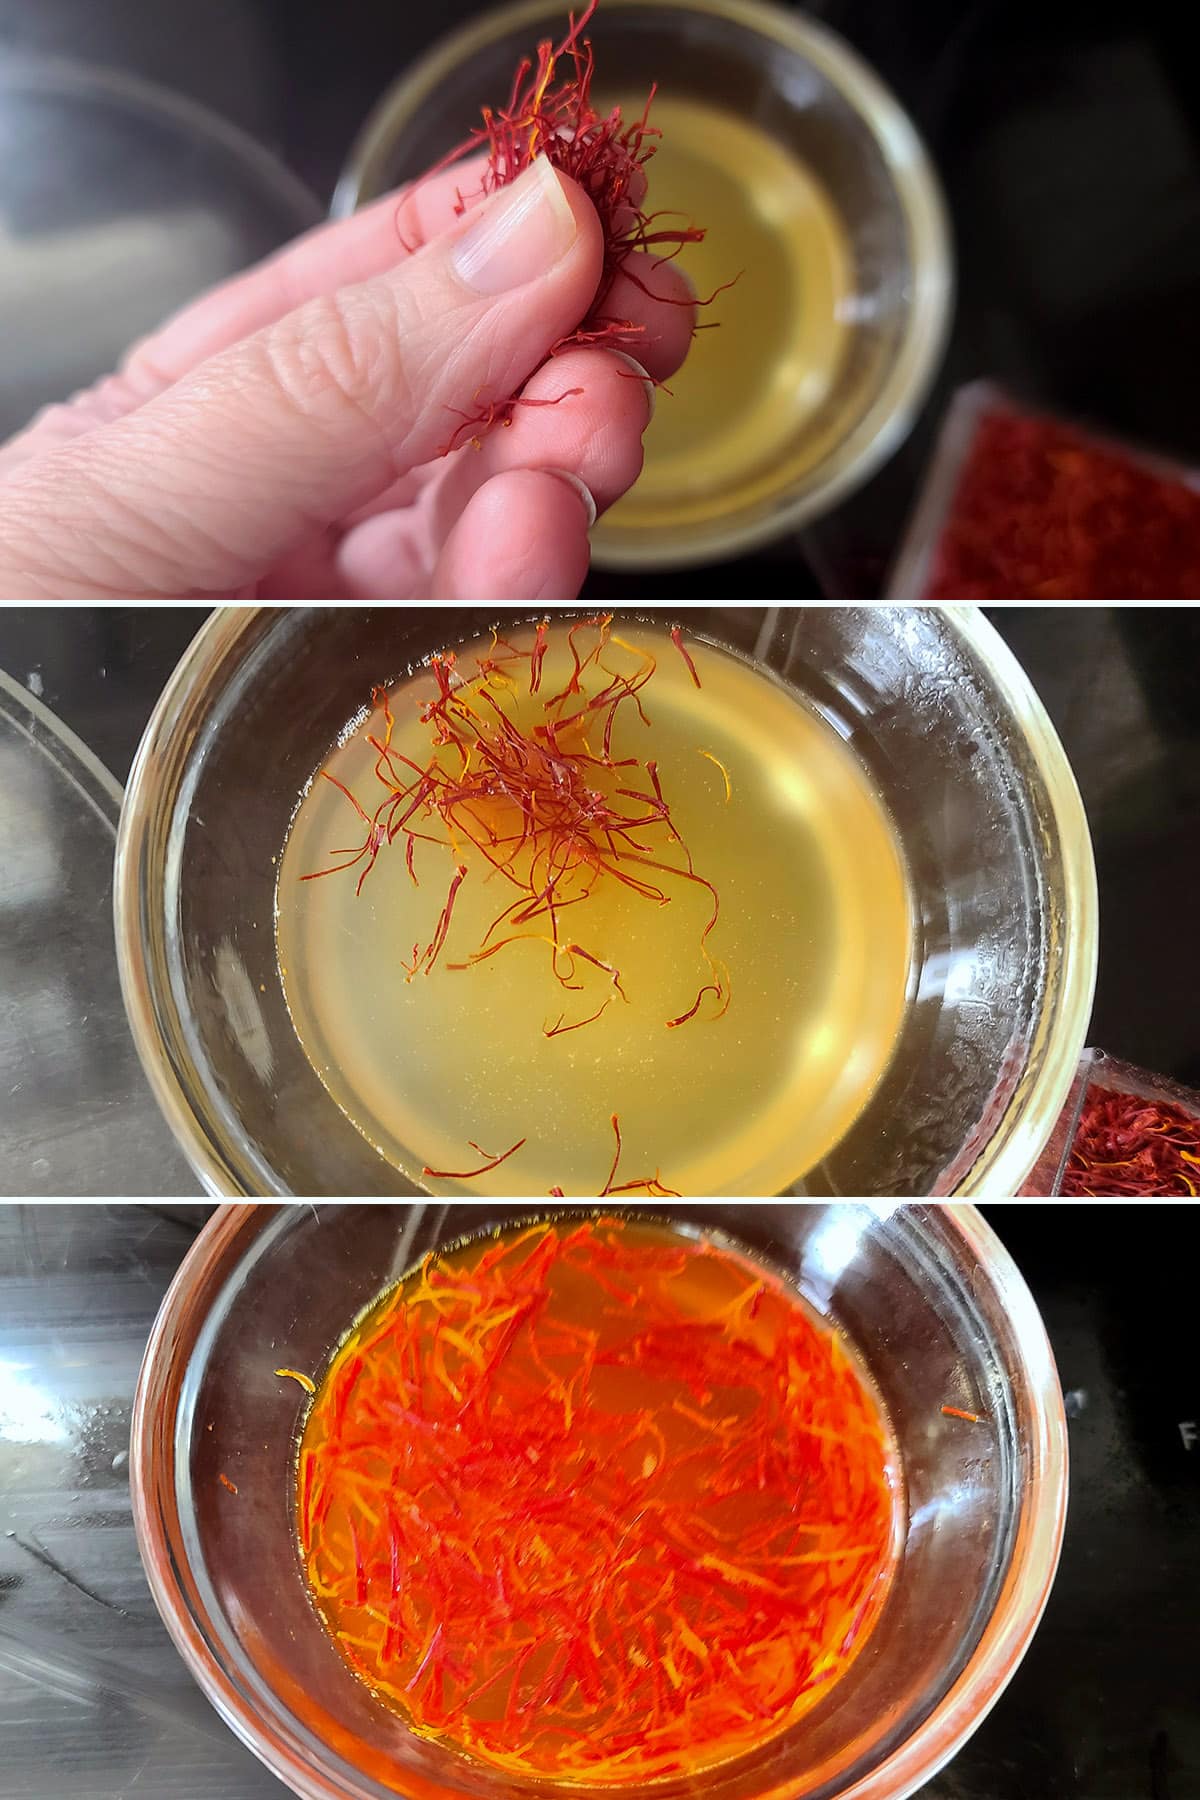 A 3 part image showing the saffron being bloomed in the chicken broth.